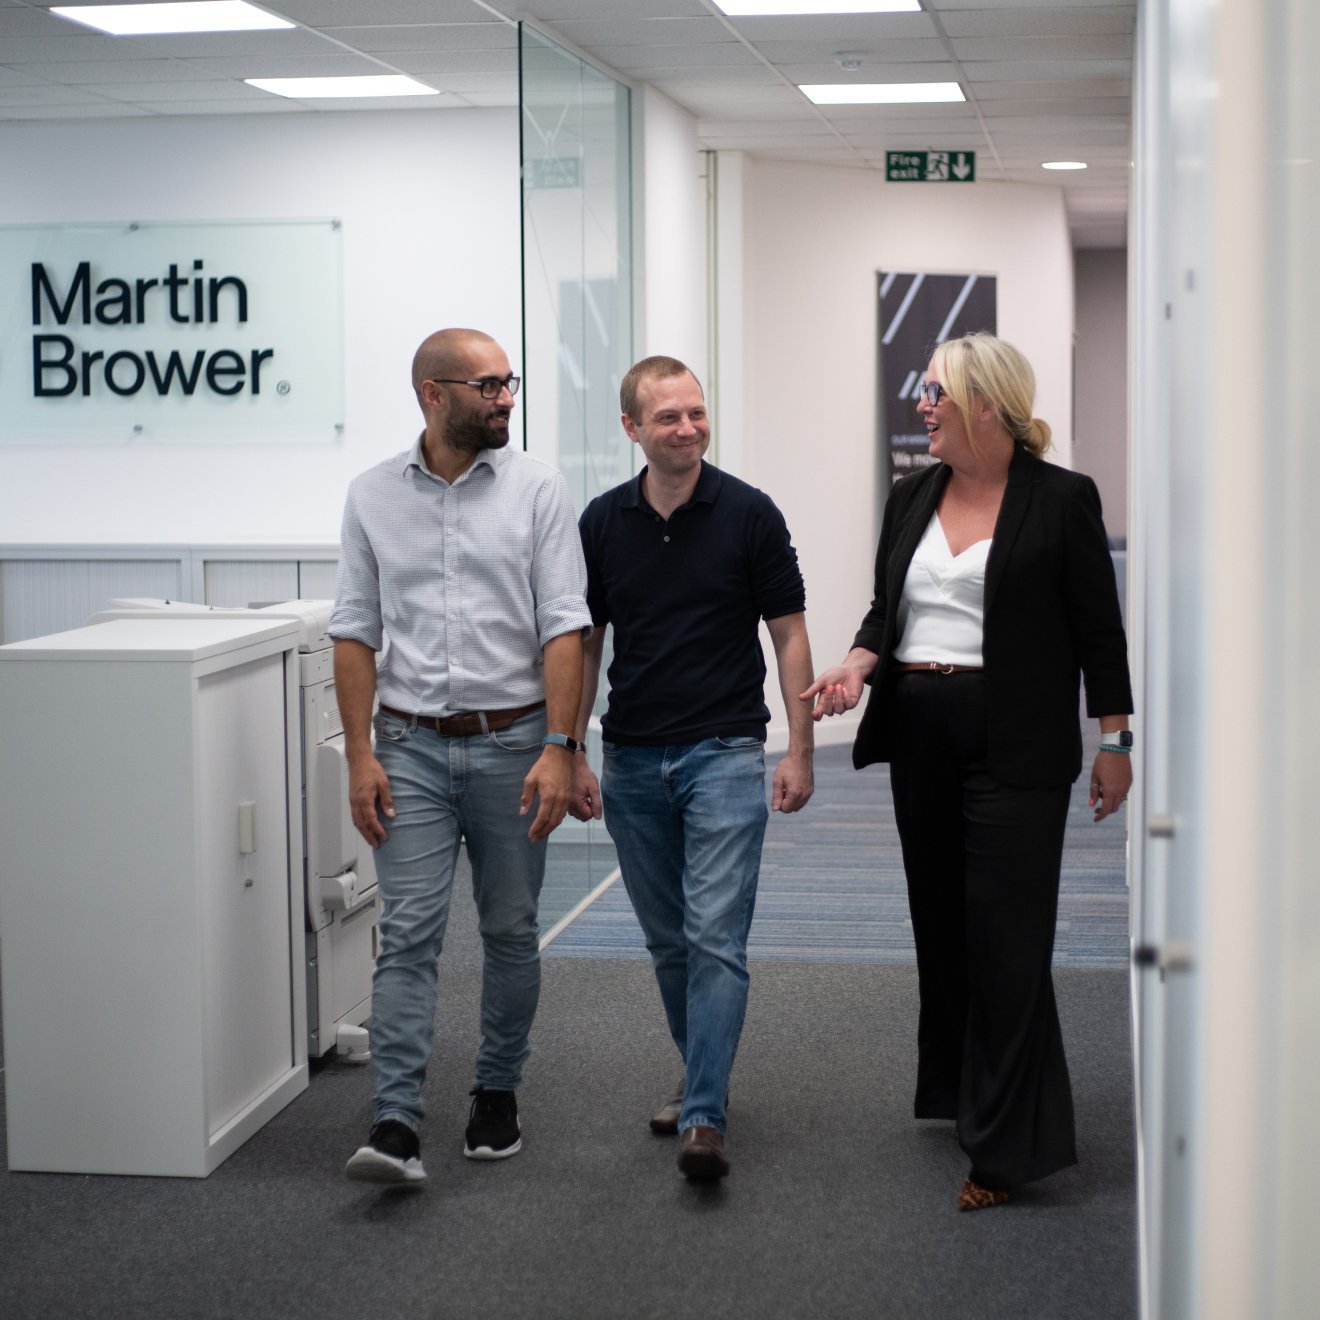 Two men and a woman walking down an office hallway talking and smiling